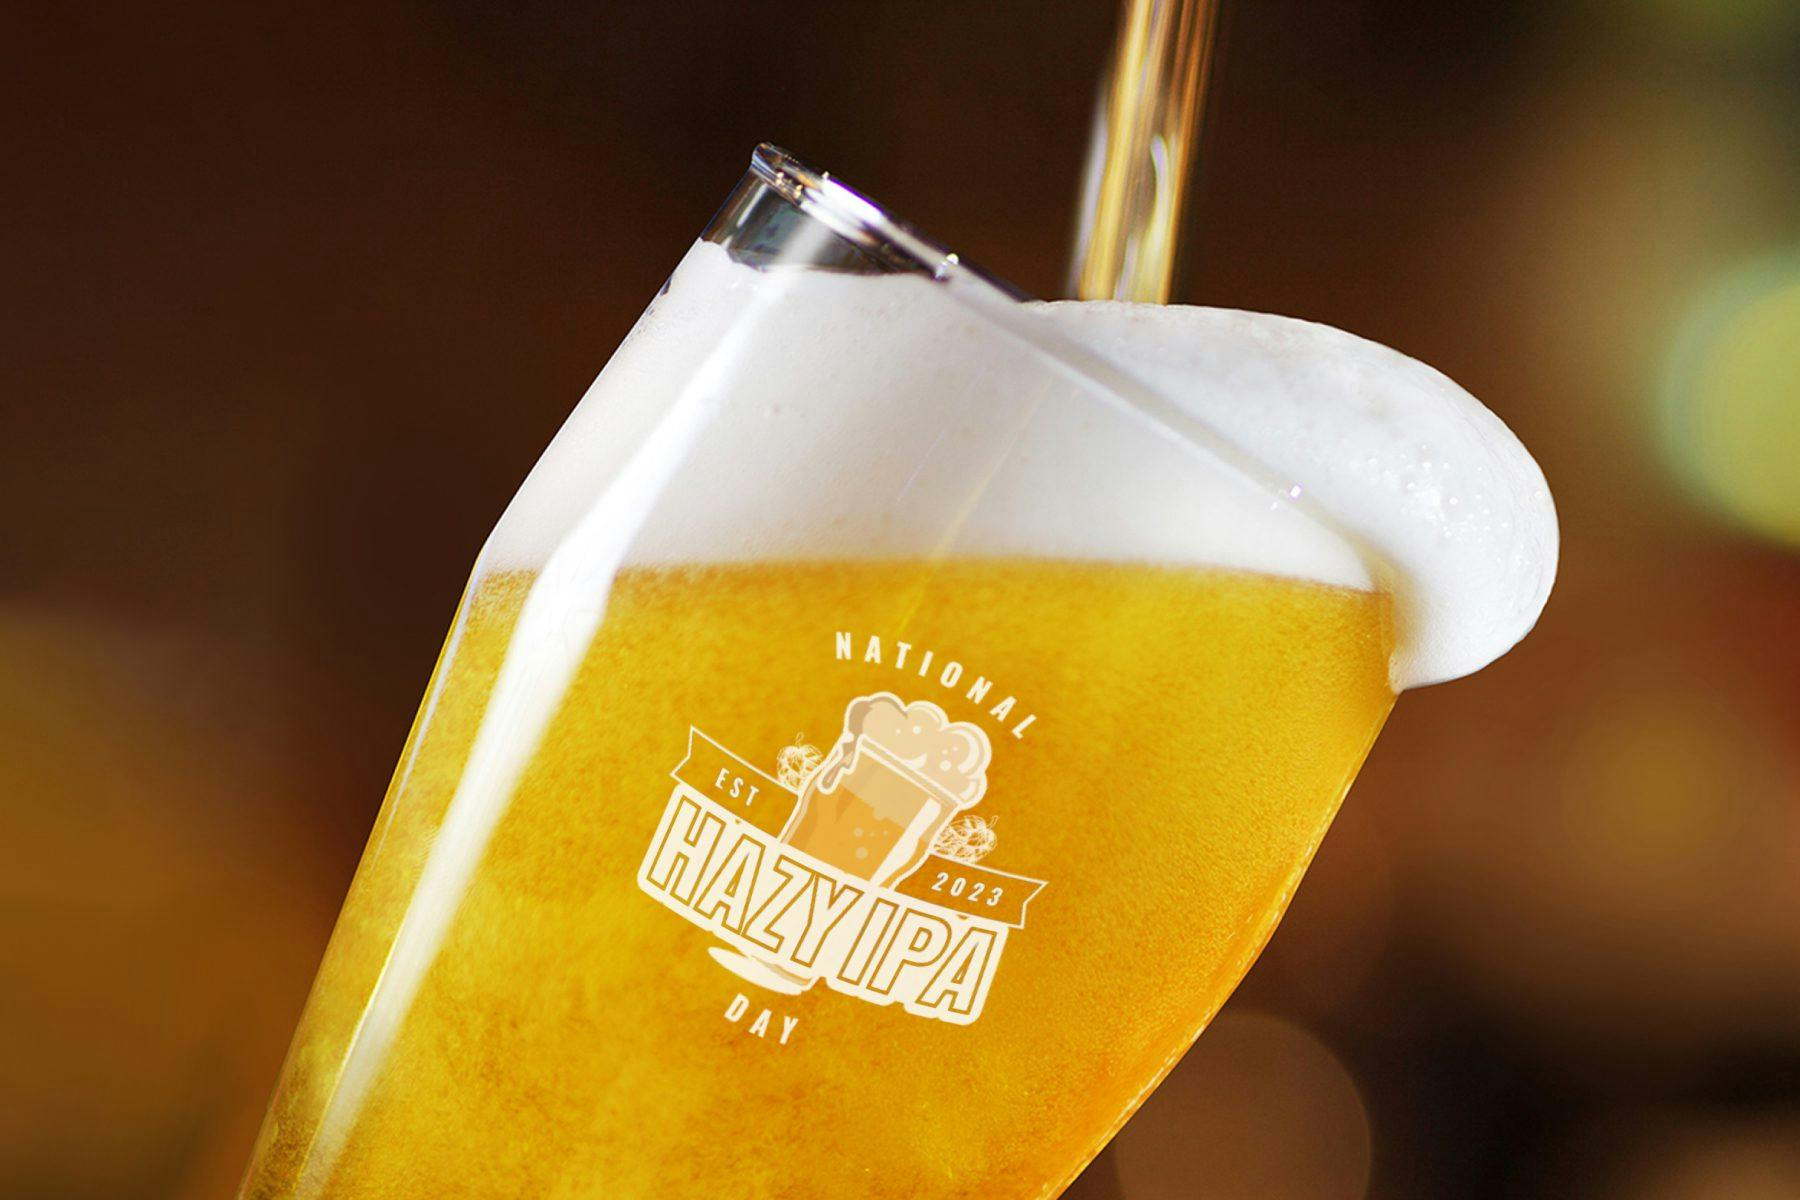 Beer filling a glass that shows the logo for National Hazy IPA Day